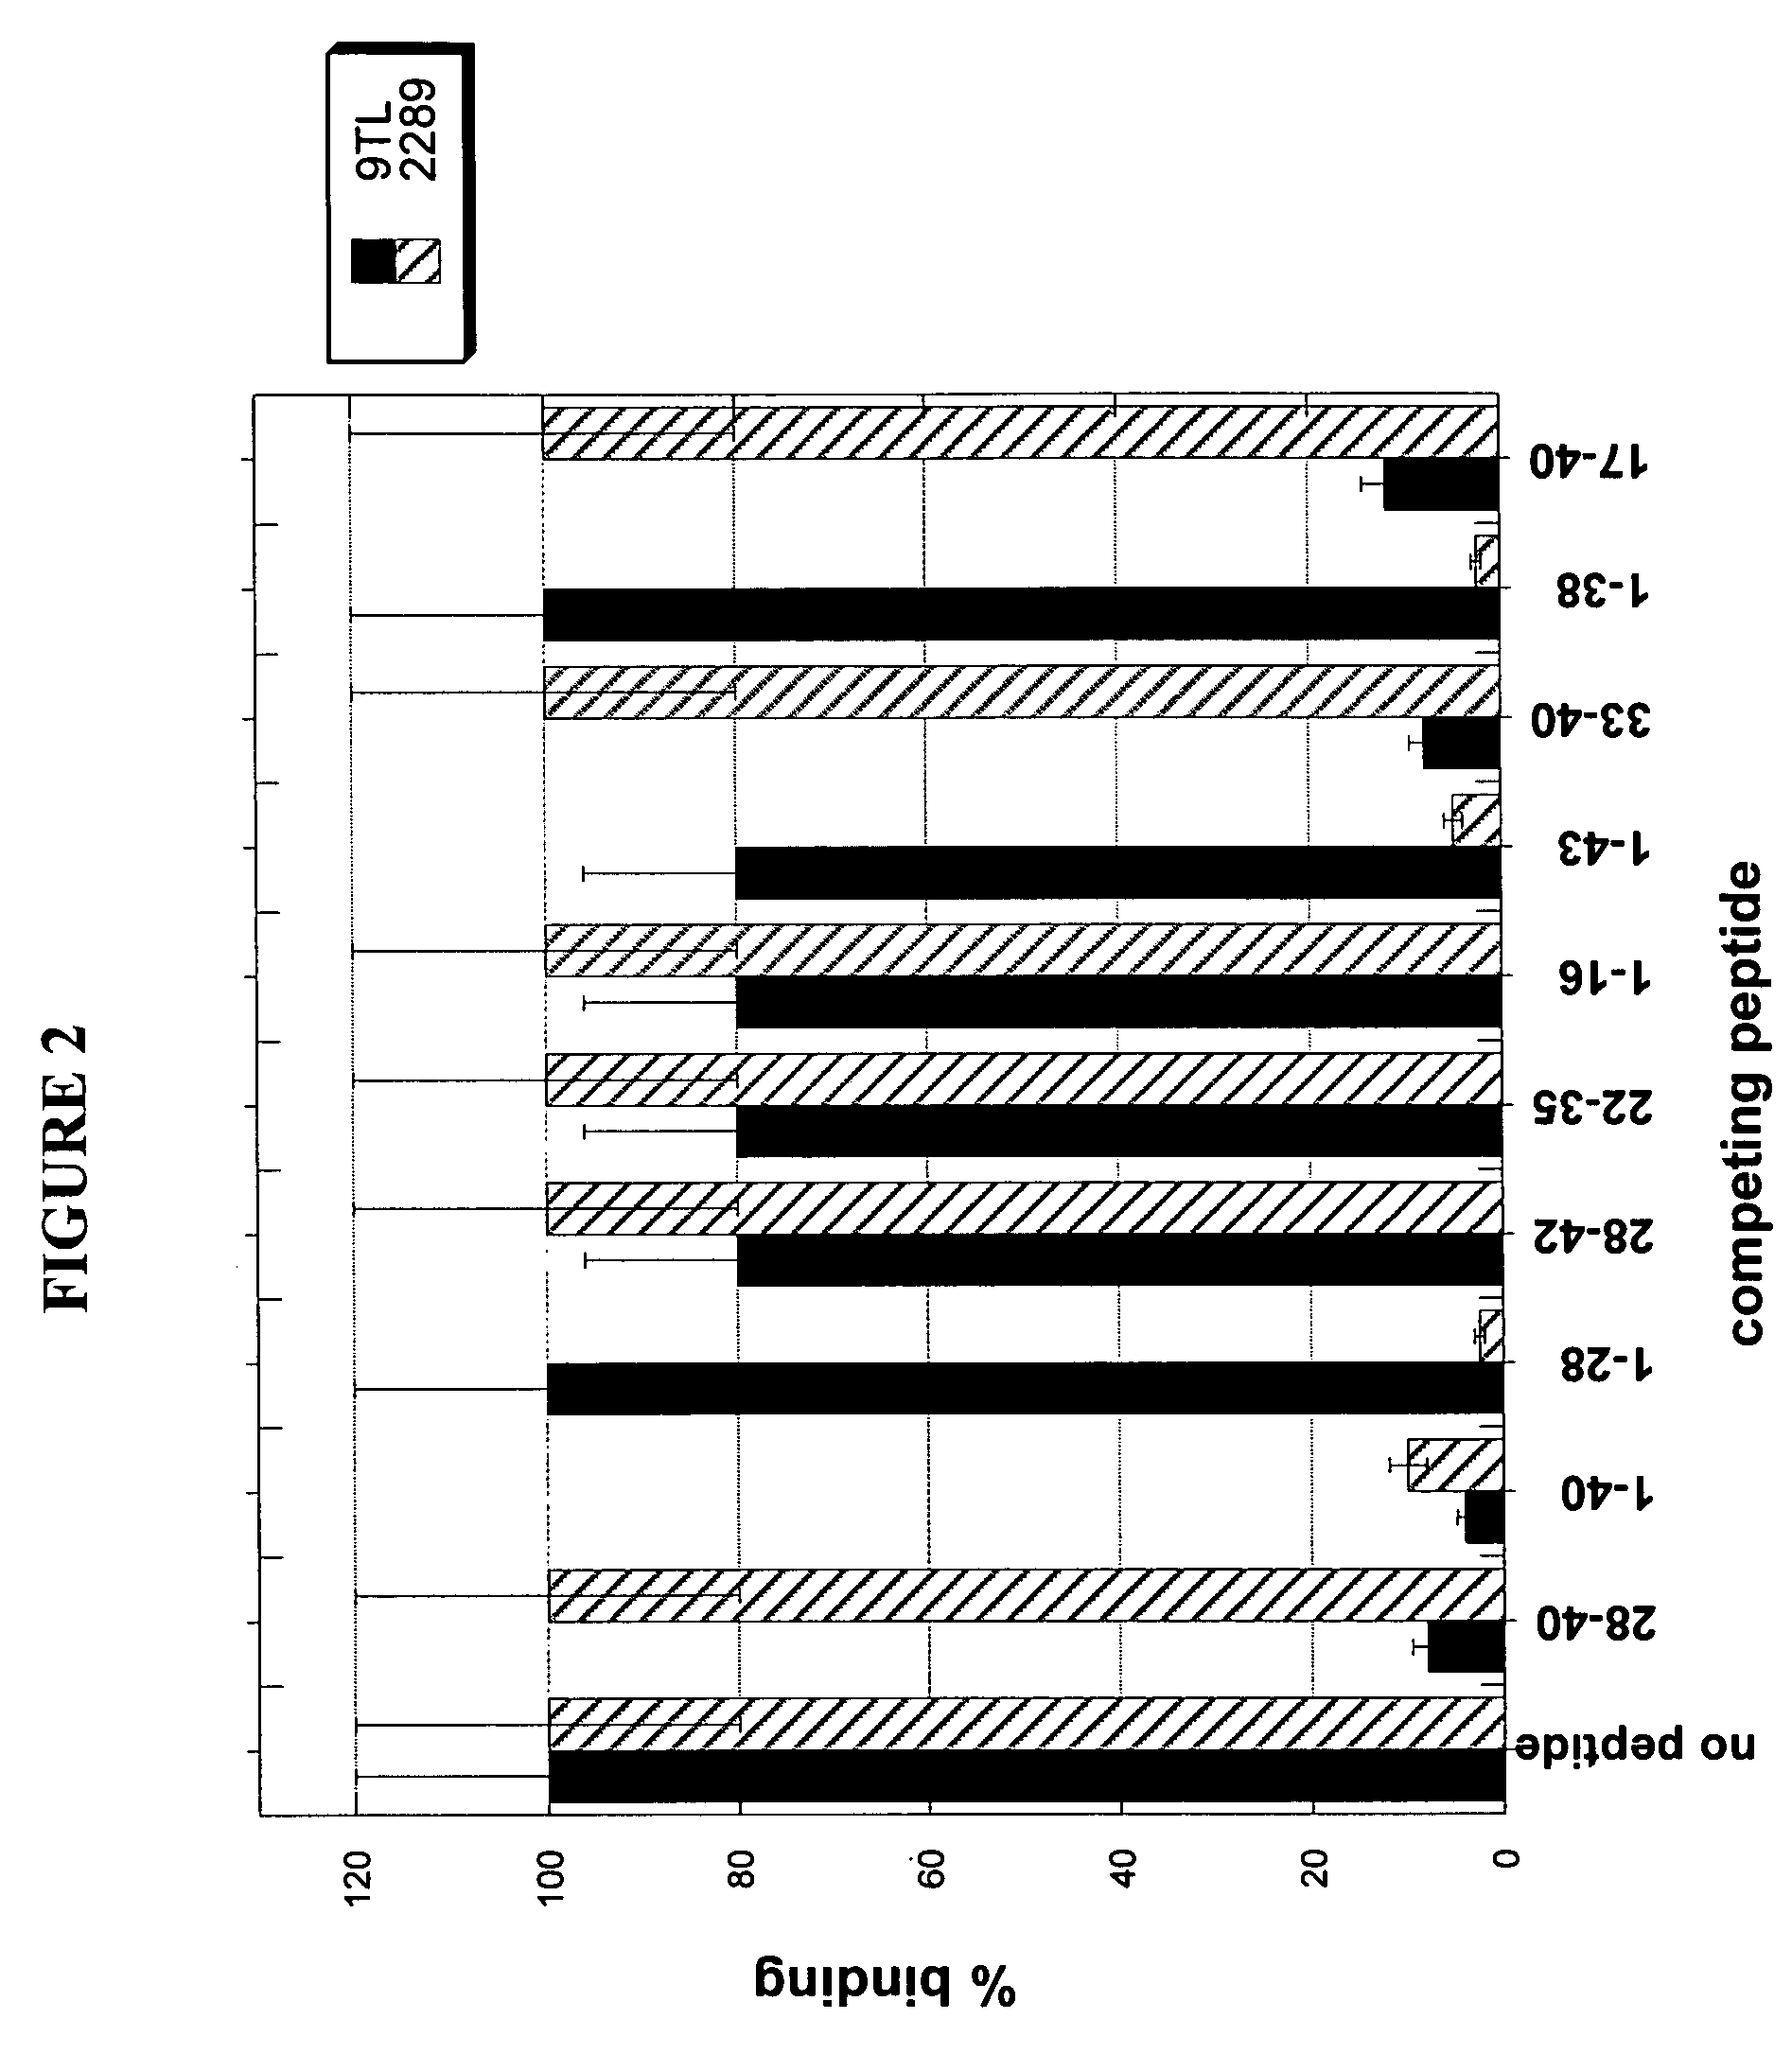 Antibodies directed against amyloid-beta peptide and methods using same